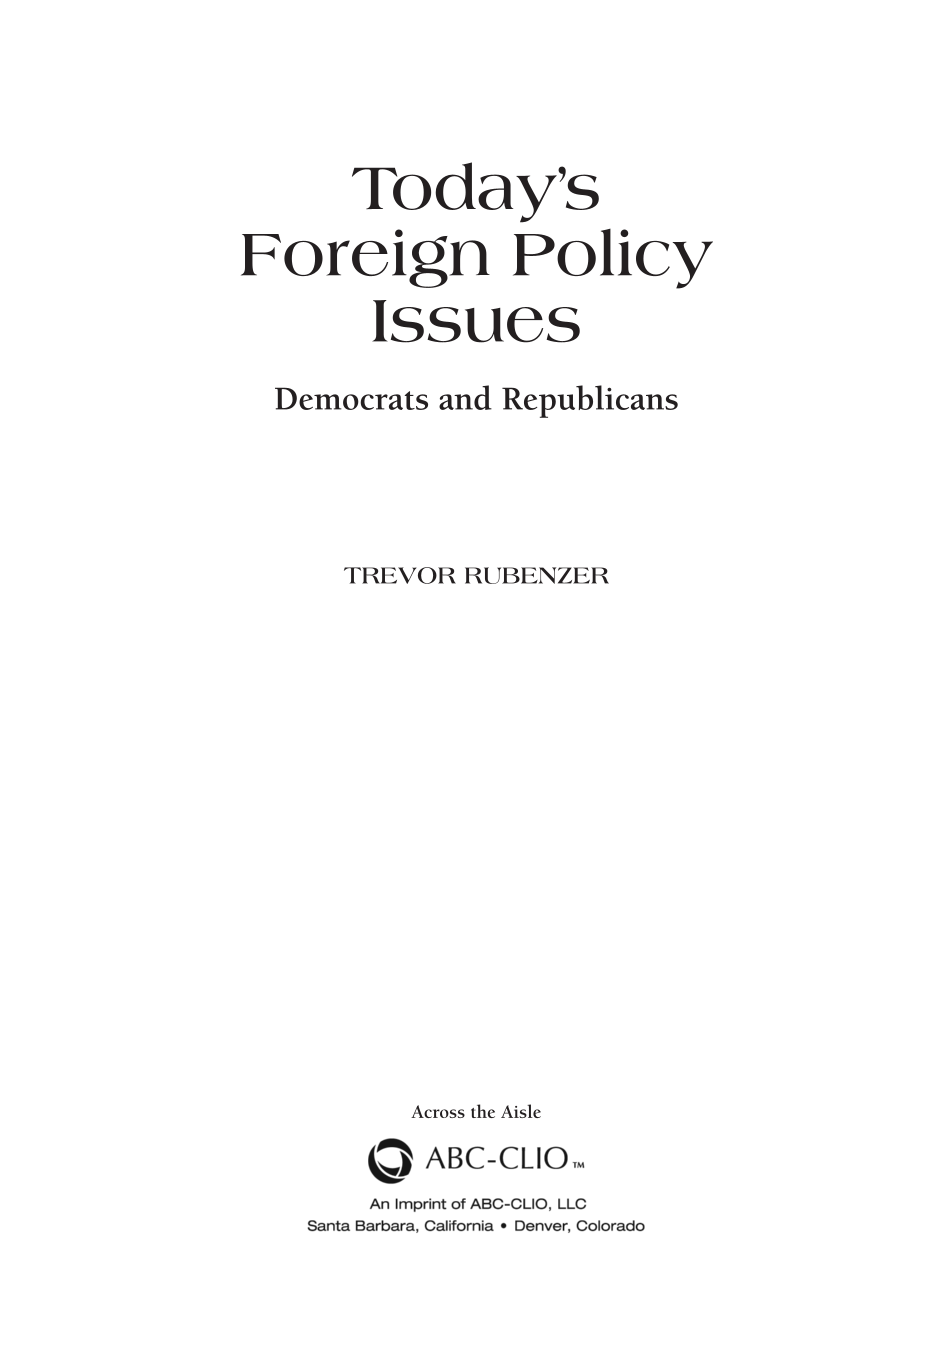 Today's Foreign Policy Issues: Democrats and Republicans page iii